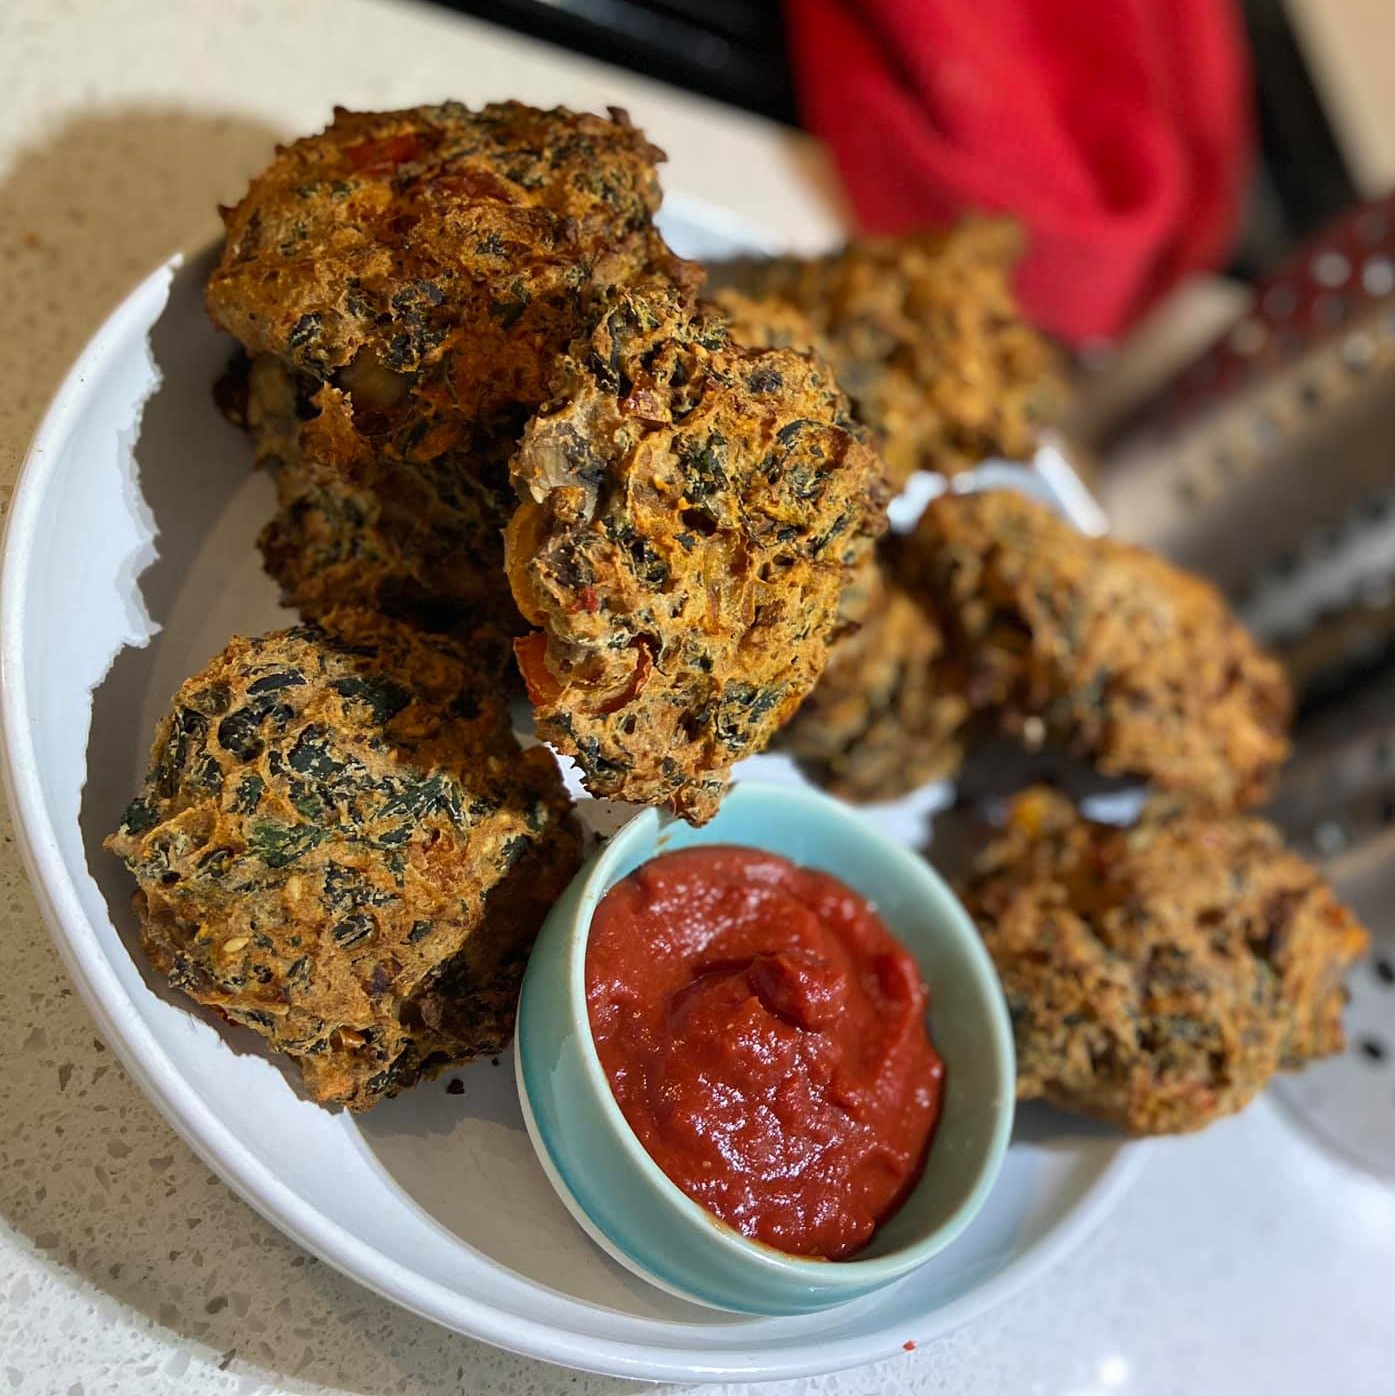 Kale Fritters